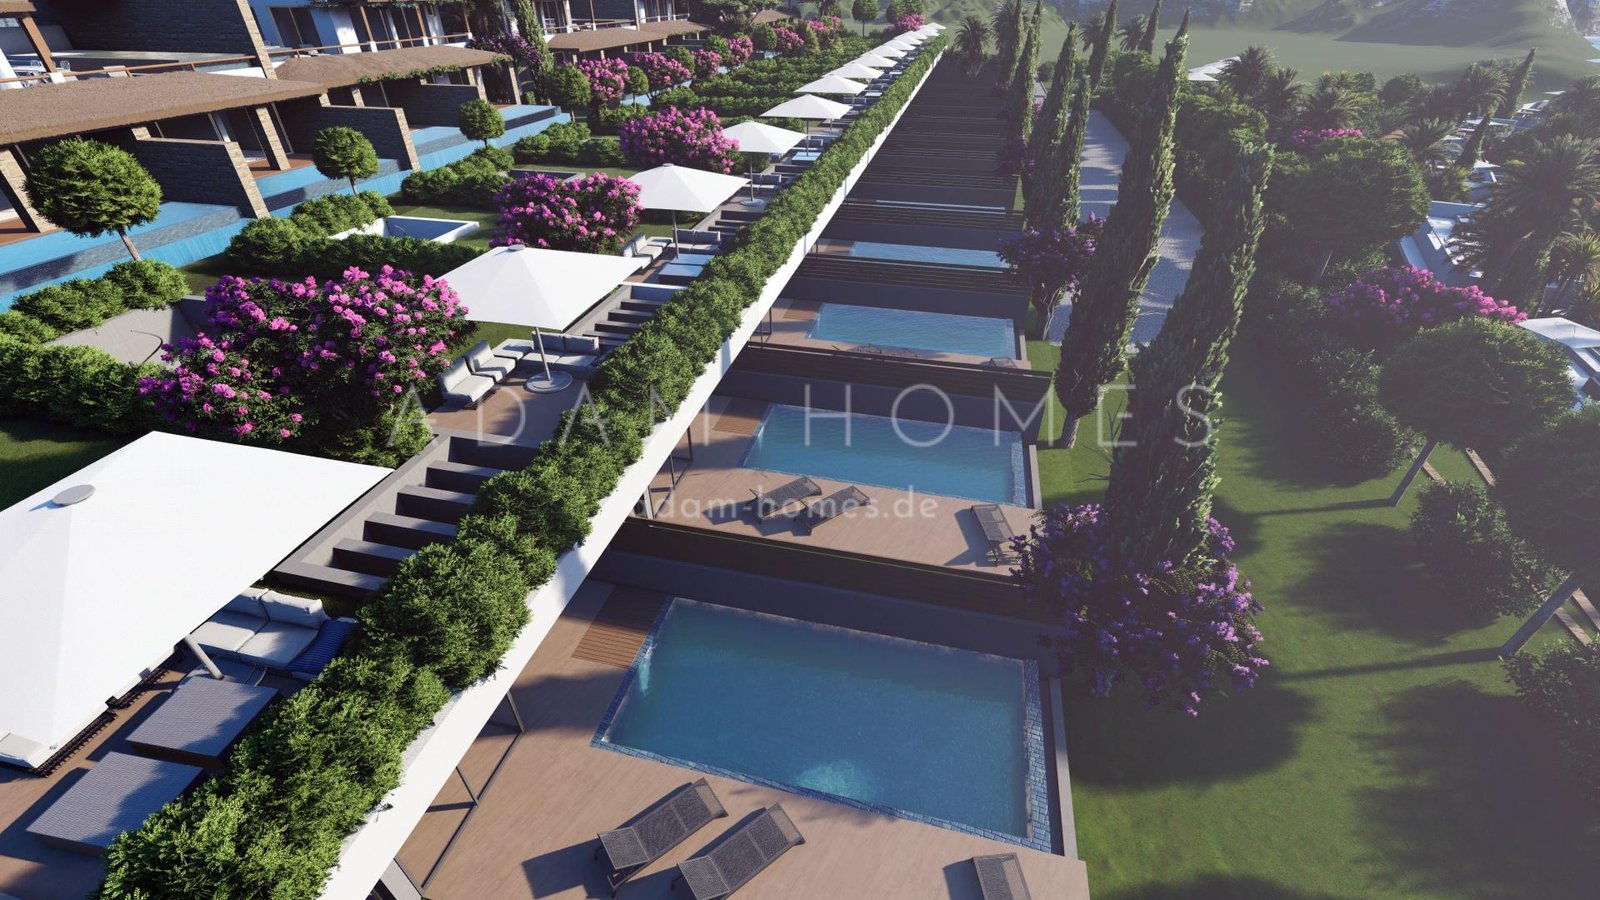 Luxure 2 bedroom apartments in a modern tropical style